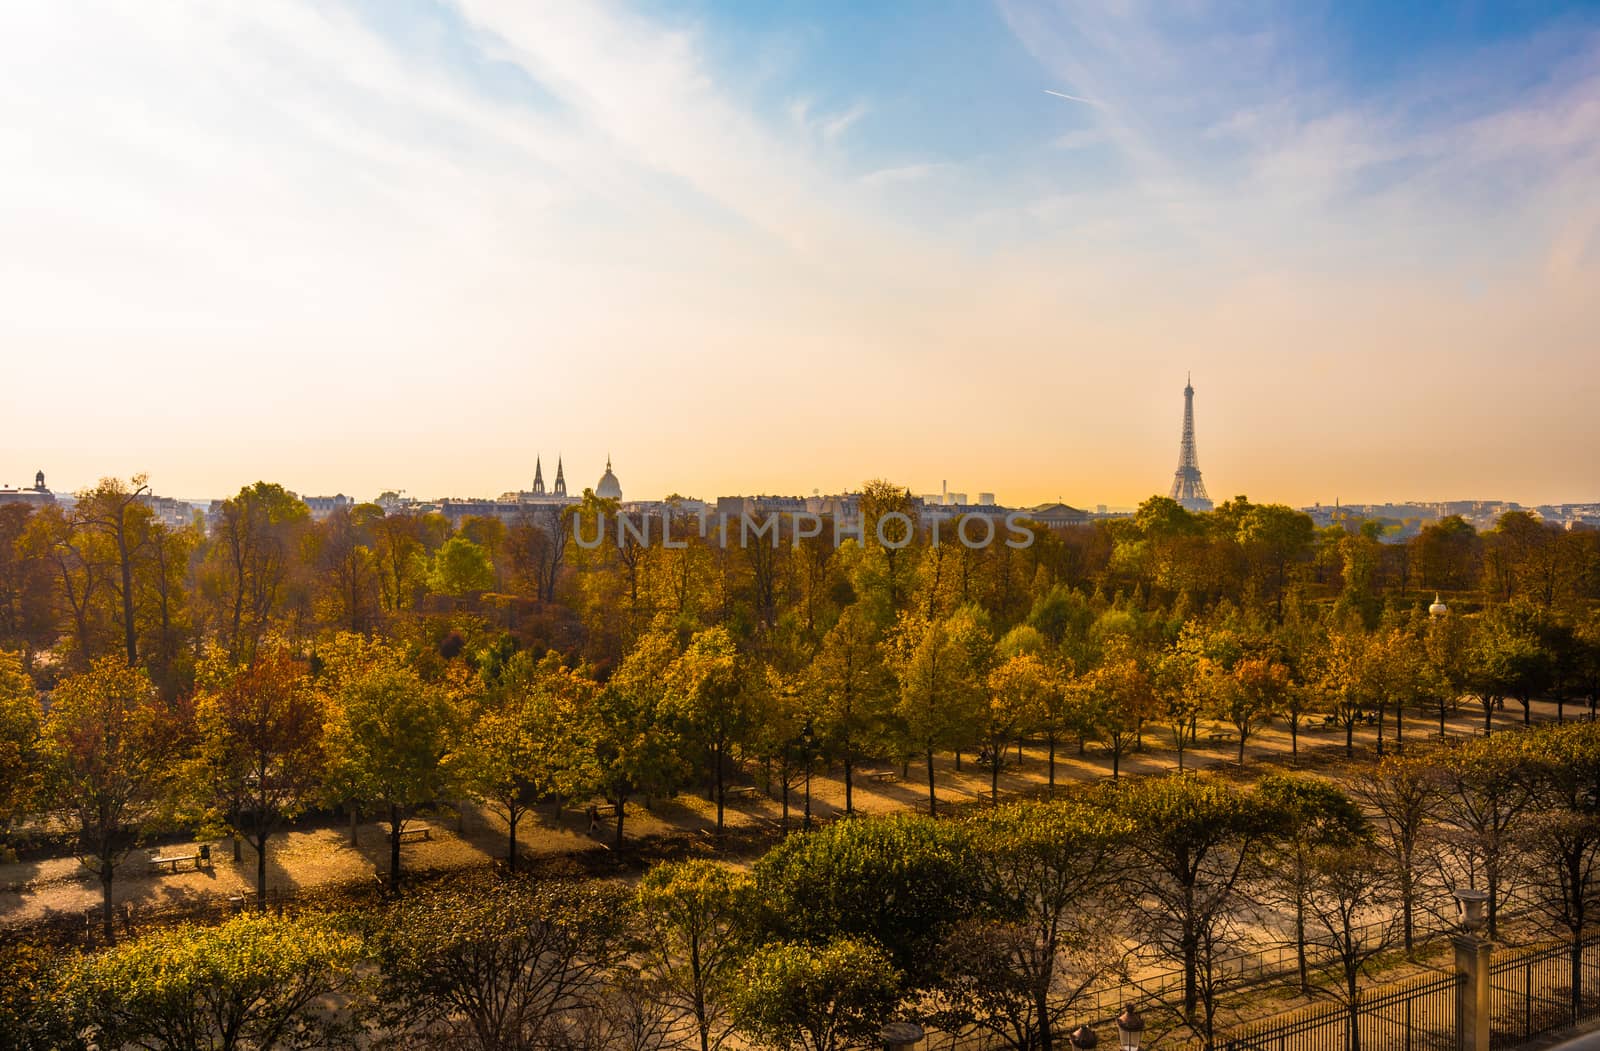 Paris, France -- November 3, 2017 -- Overlooking the Tuilery Gardens on a Paris morning, with the Eiffel tower in the background.